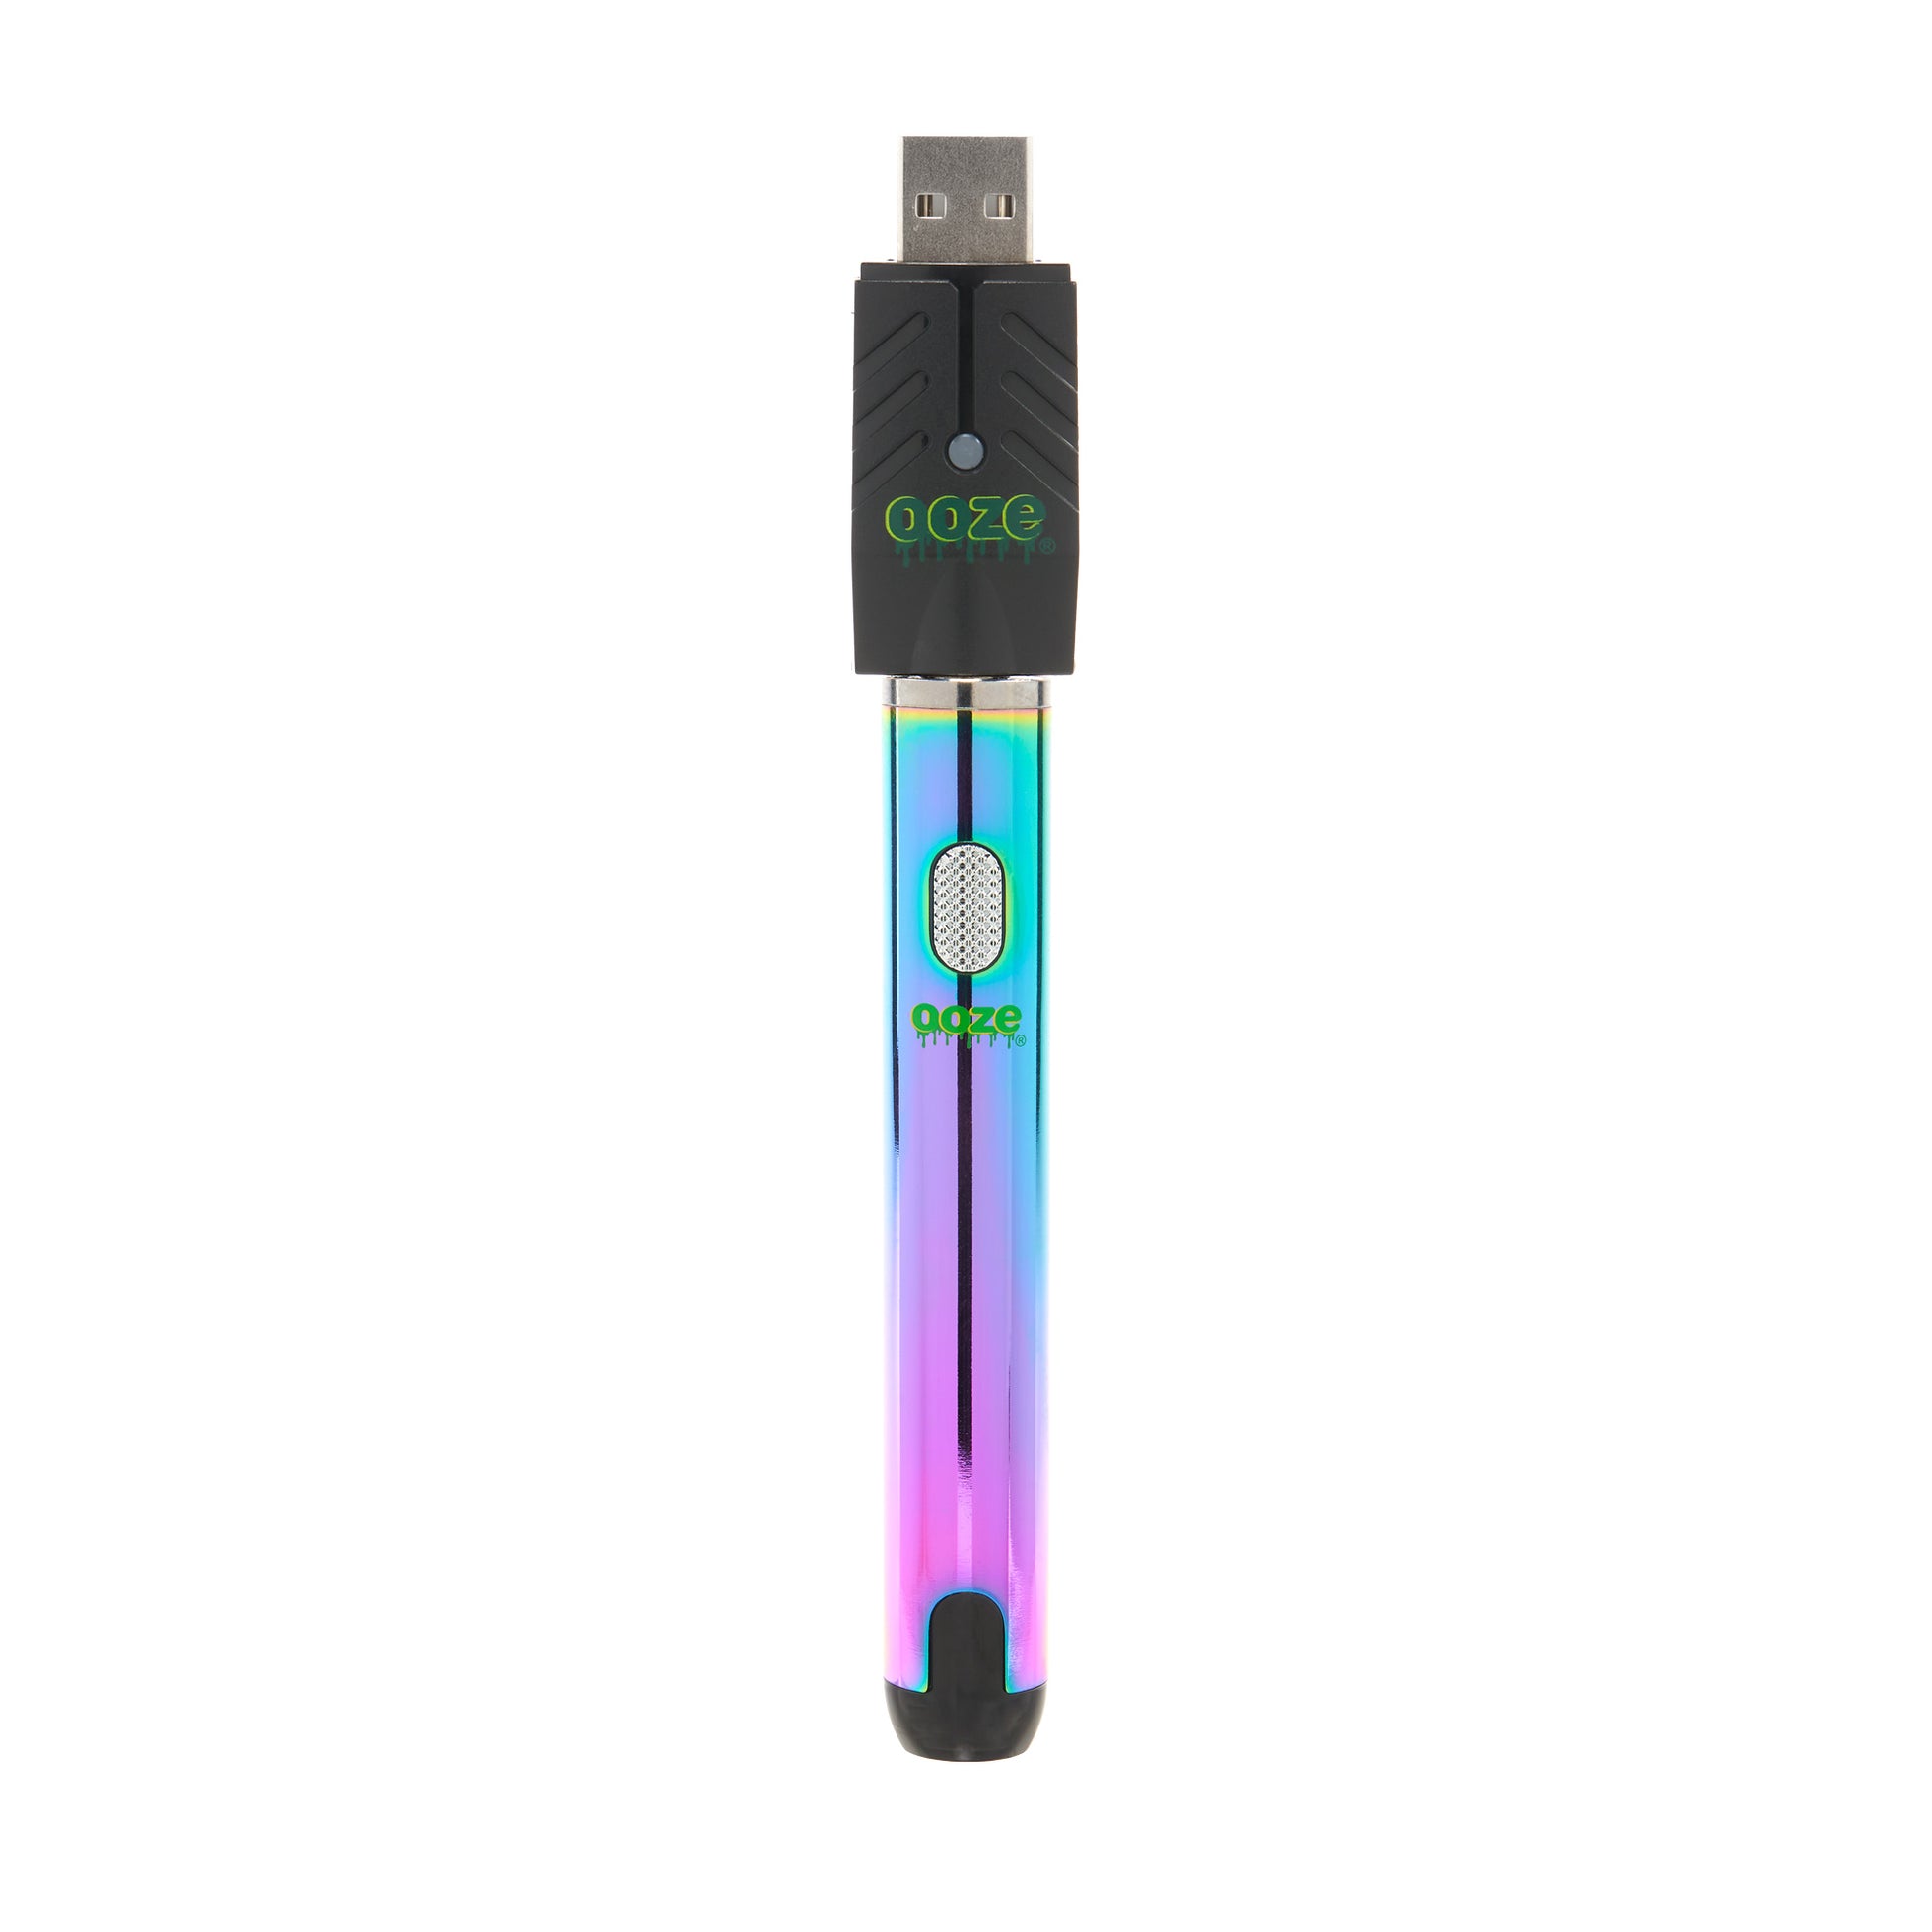 The rainbow Ooze Smart Battery is upright with the charger attached